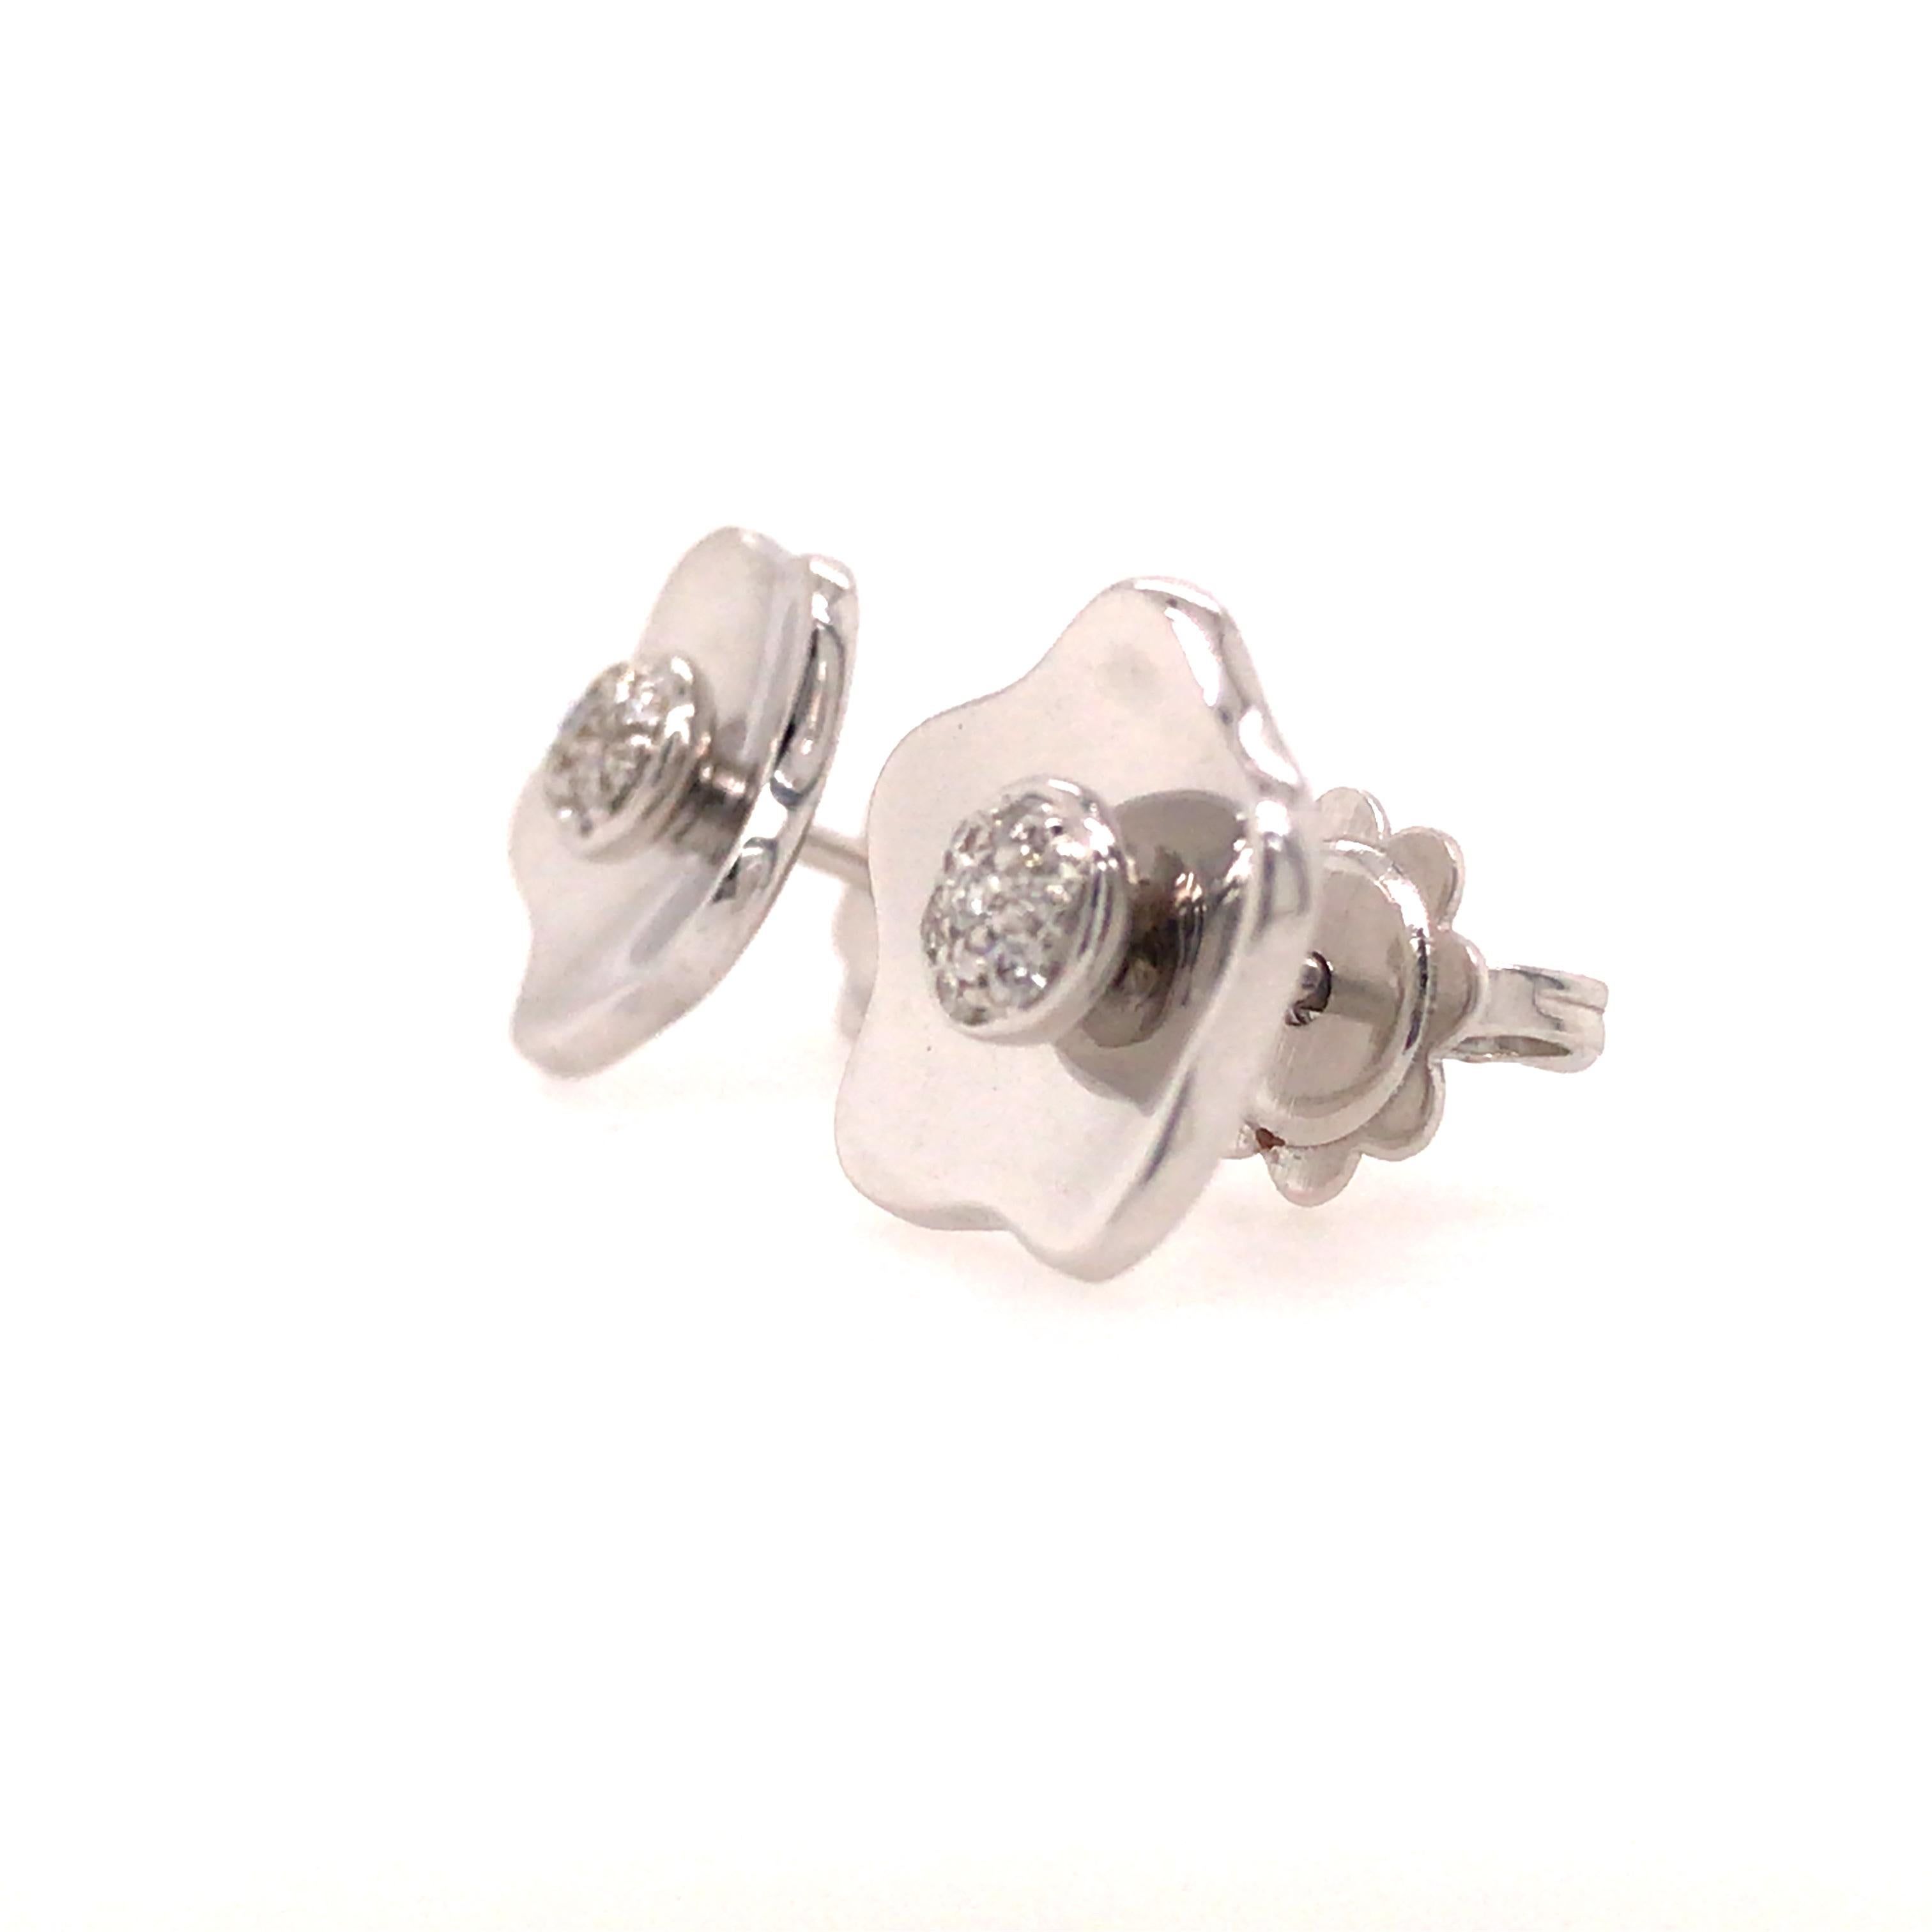 Giorgio Visconti Stud Flower Blossom Earrings in 18K White Gold.  Round Brilliant Cut Diamonds weighing 0.07 carat total weight, G-H in color and VS in clarity are expertly pave set.  The Earrings measure 1/2 inch in length and width. 5.59 grams. 